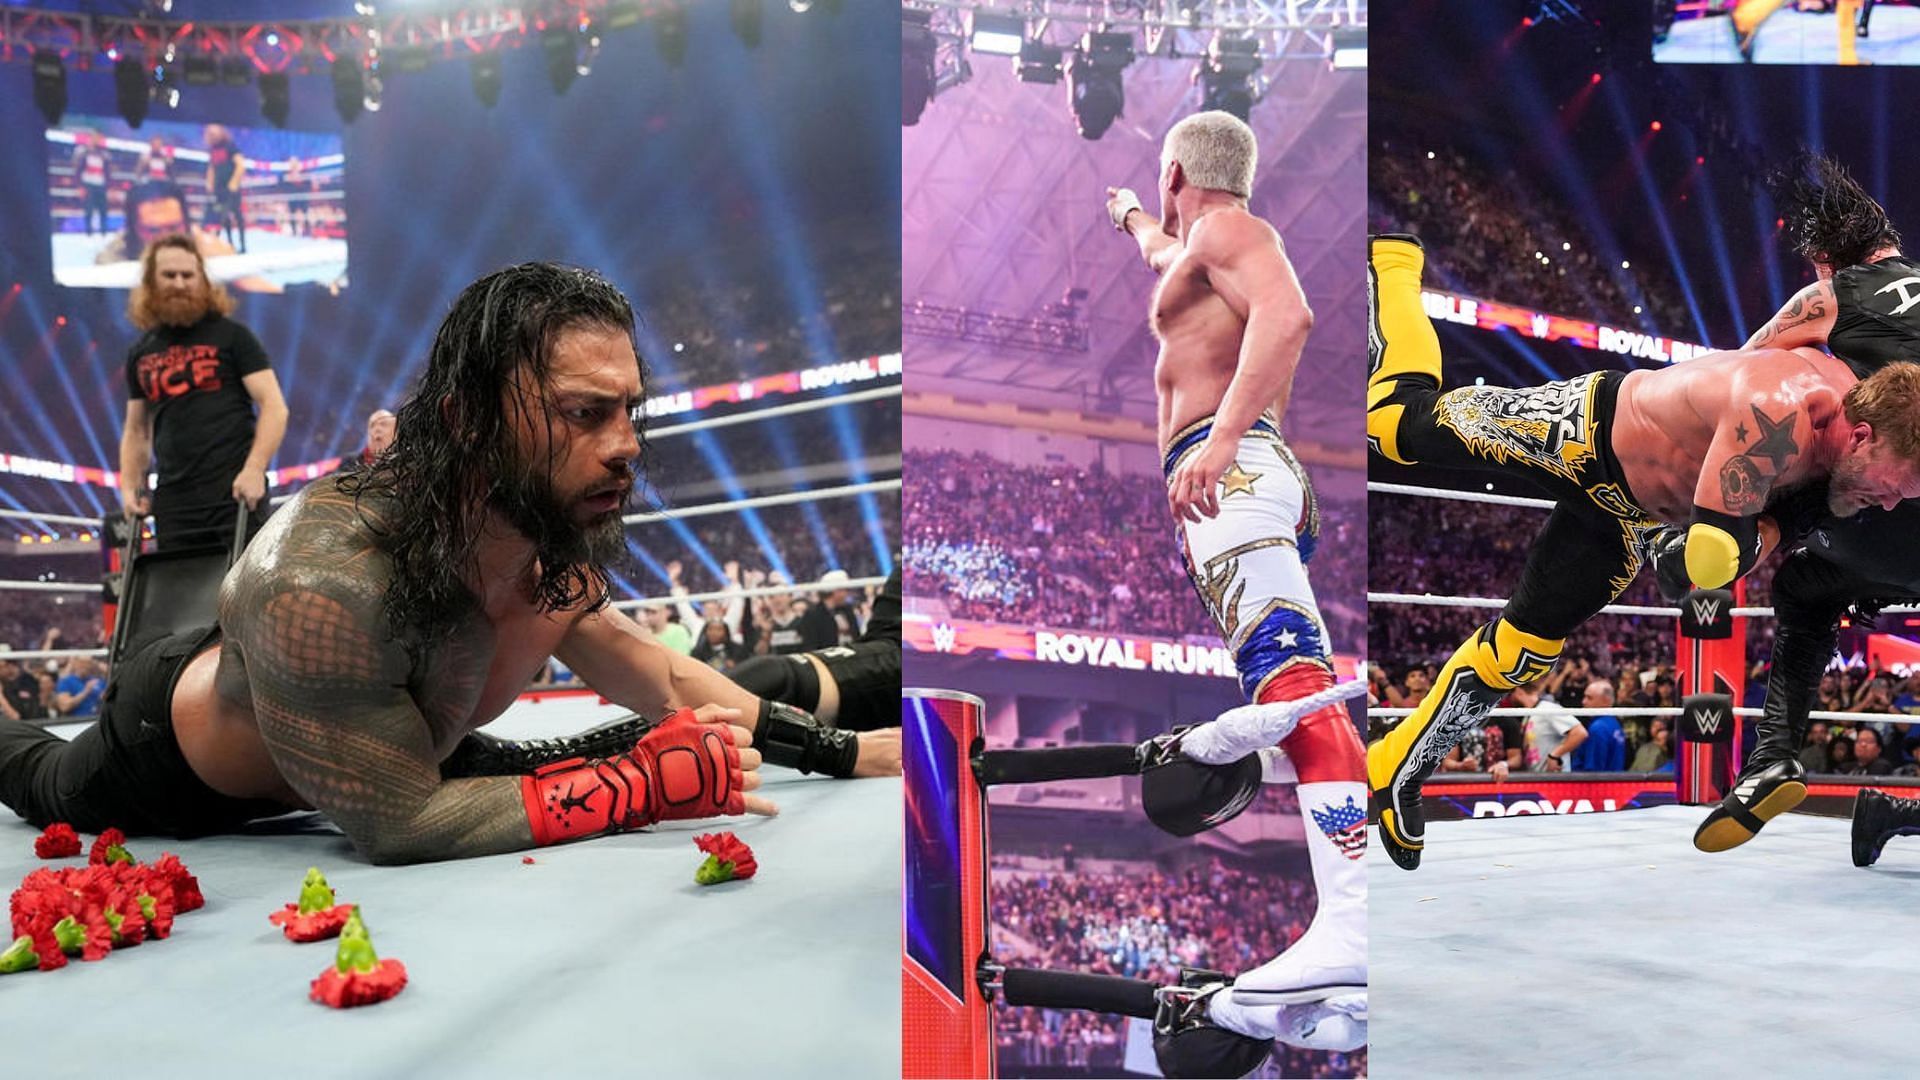 WWE Royal Rumble 2023 was a tremendous show.